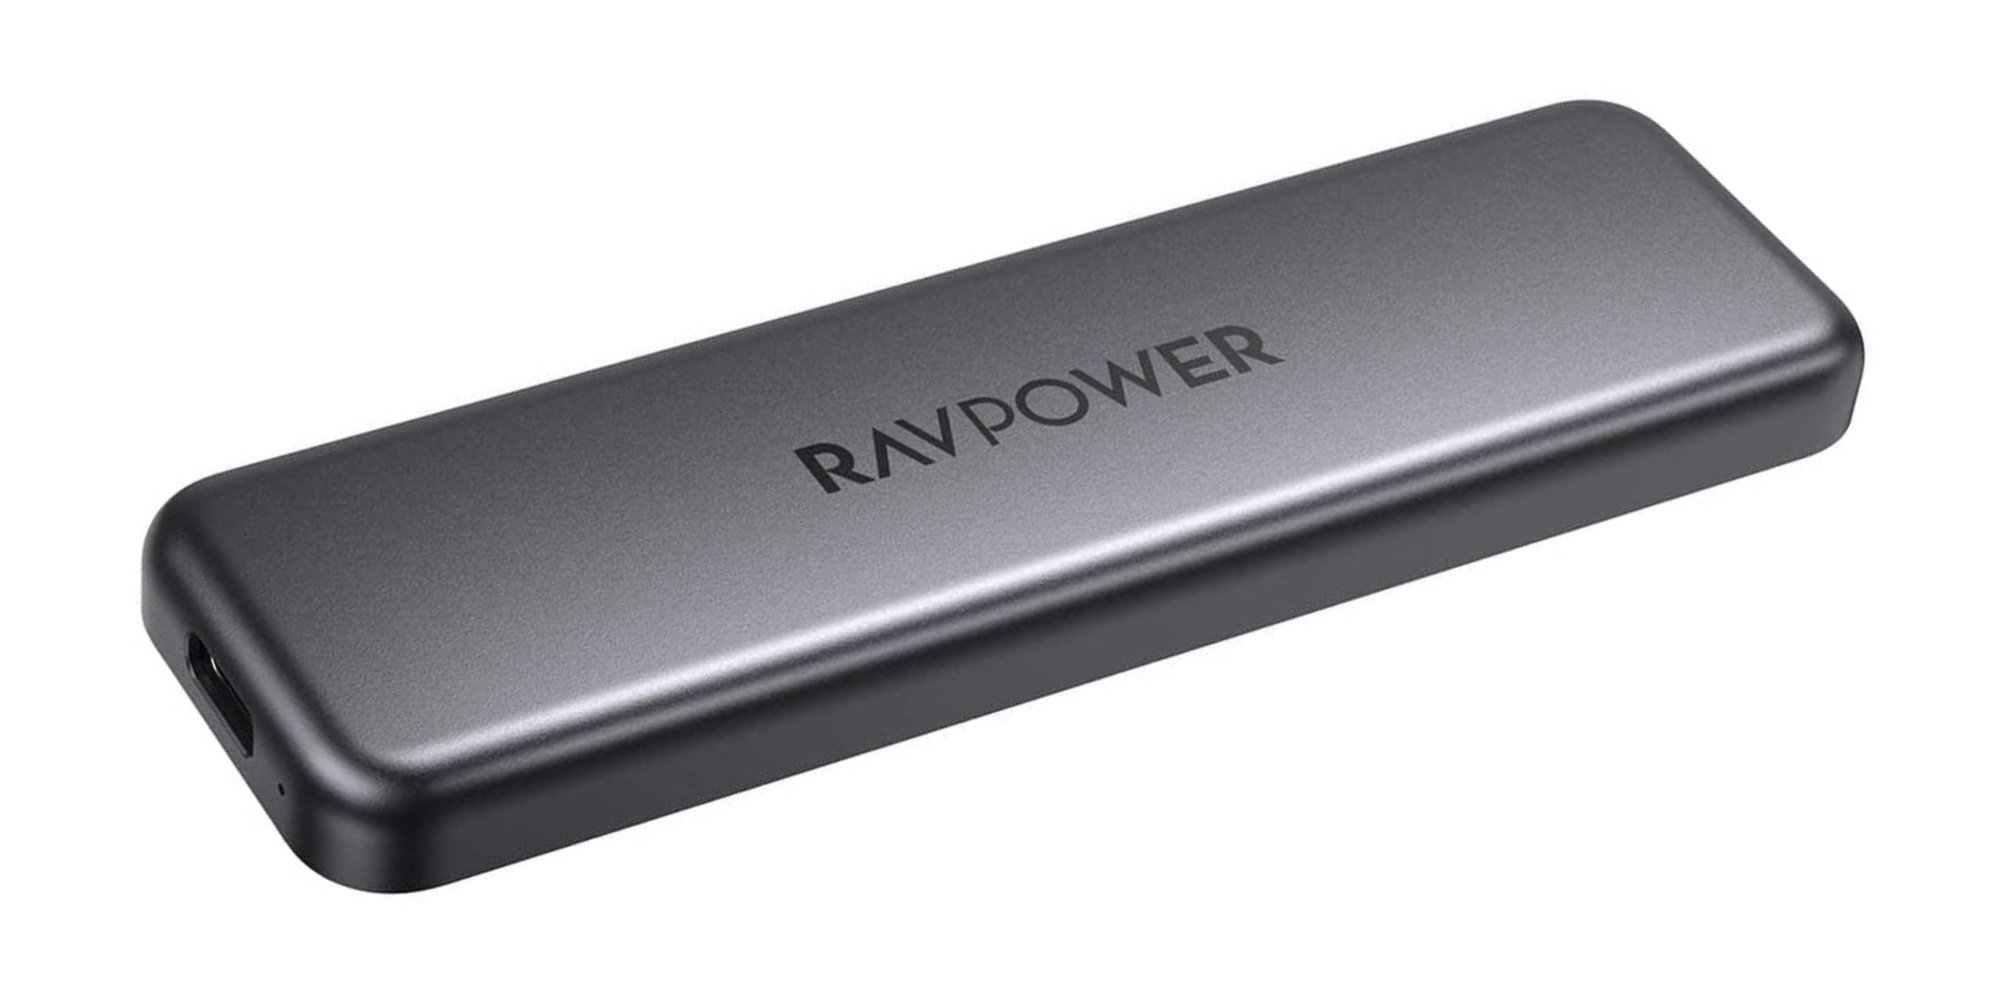 RAVPower's Portable USB-C SSD backed by speeds at $115 (24% off)